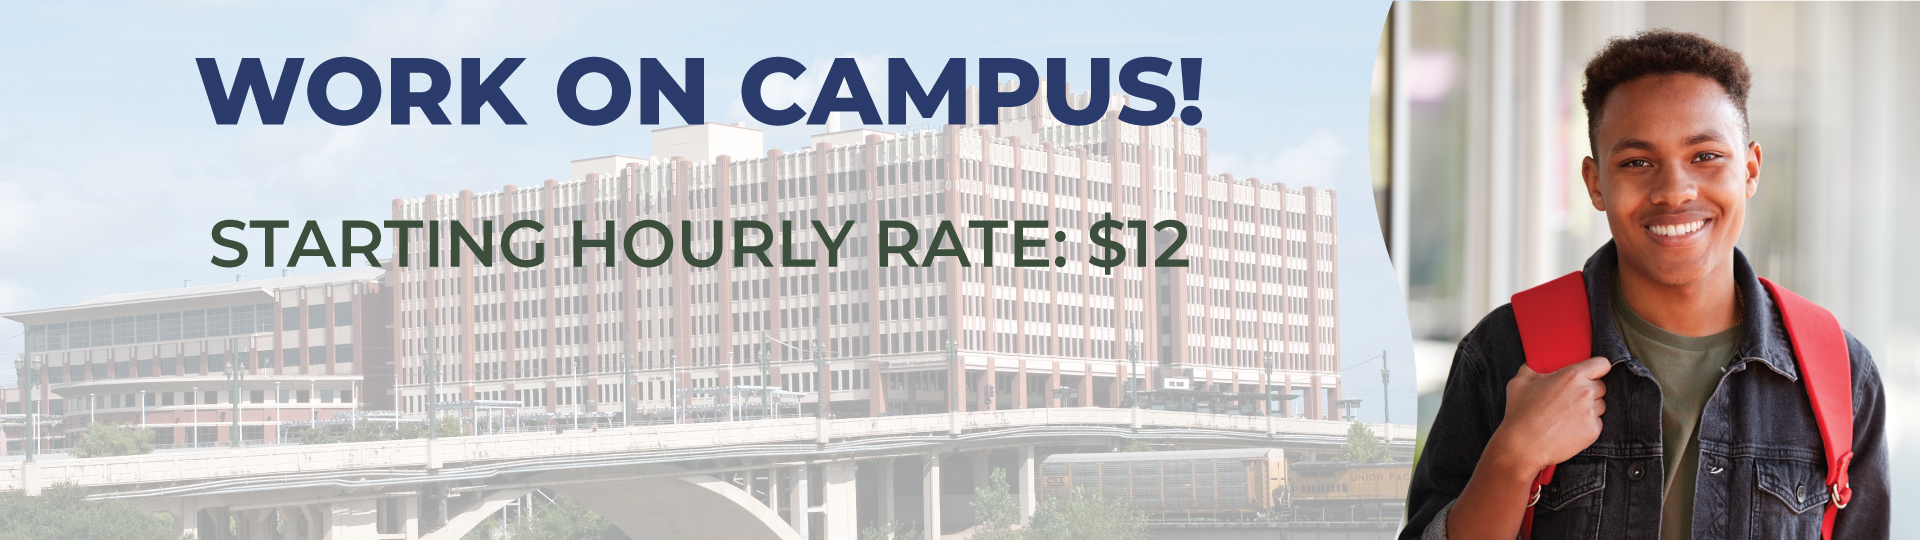 Work on campus! Starting hourly rate:$12